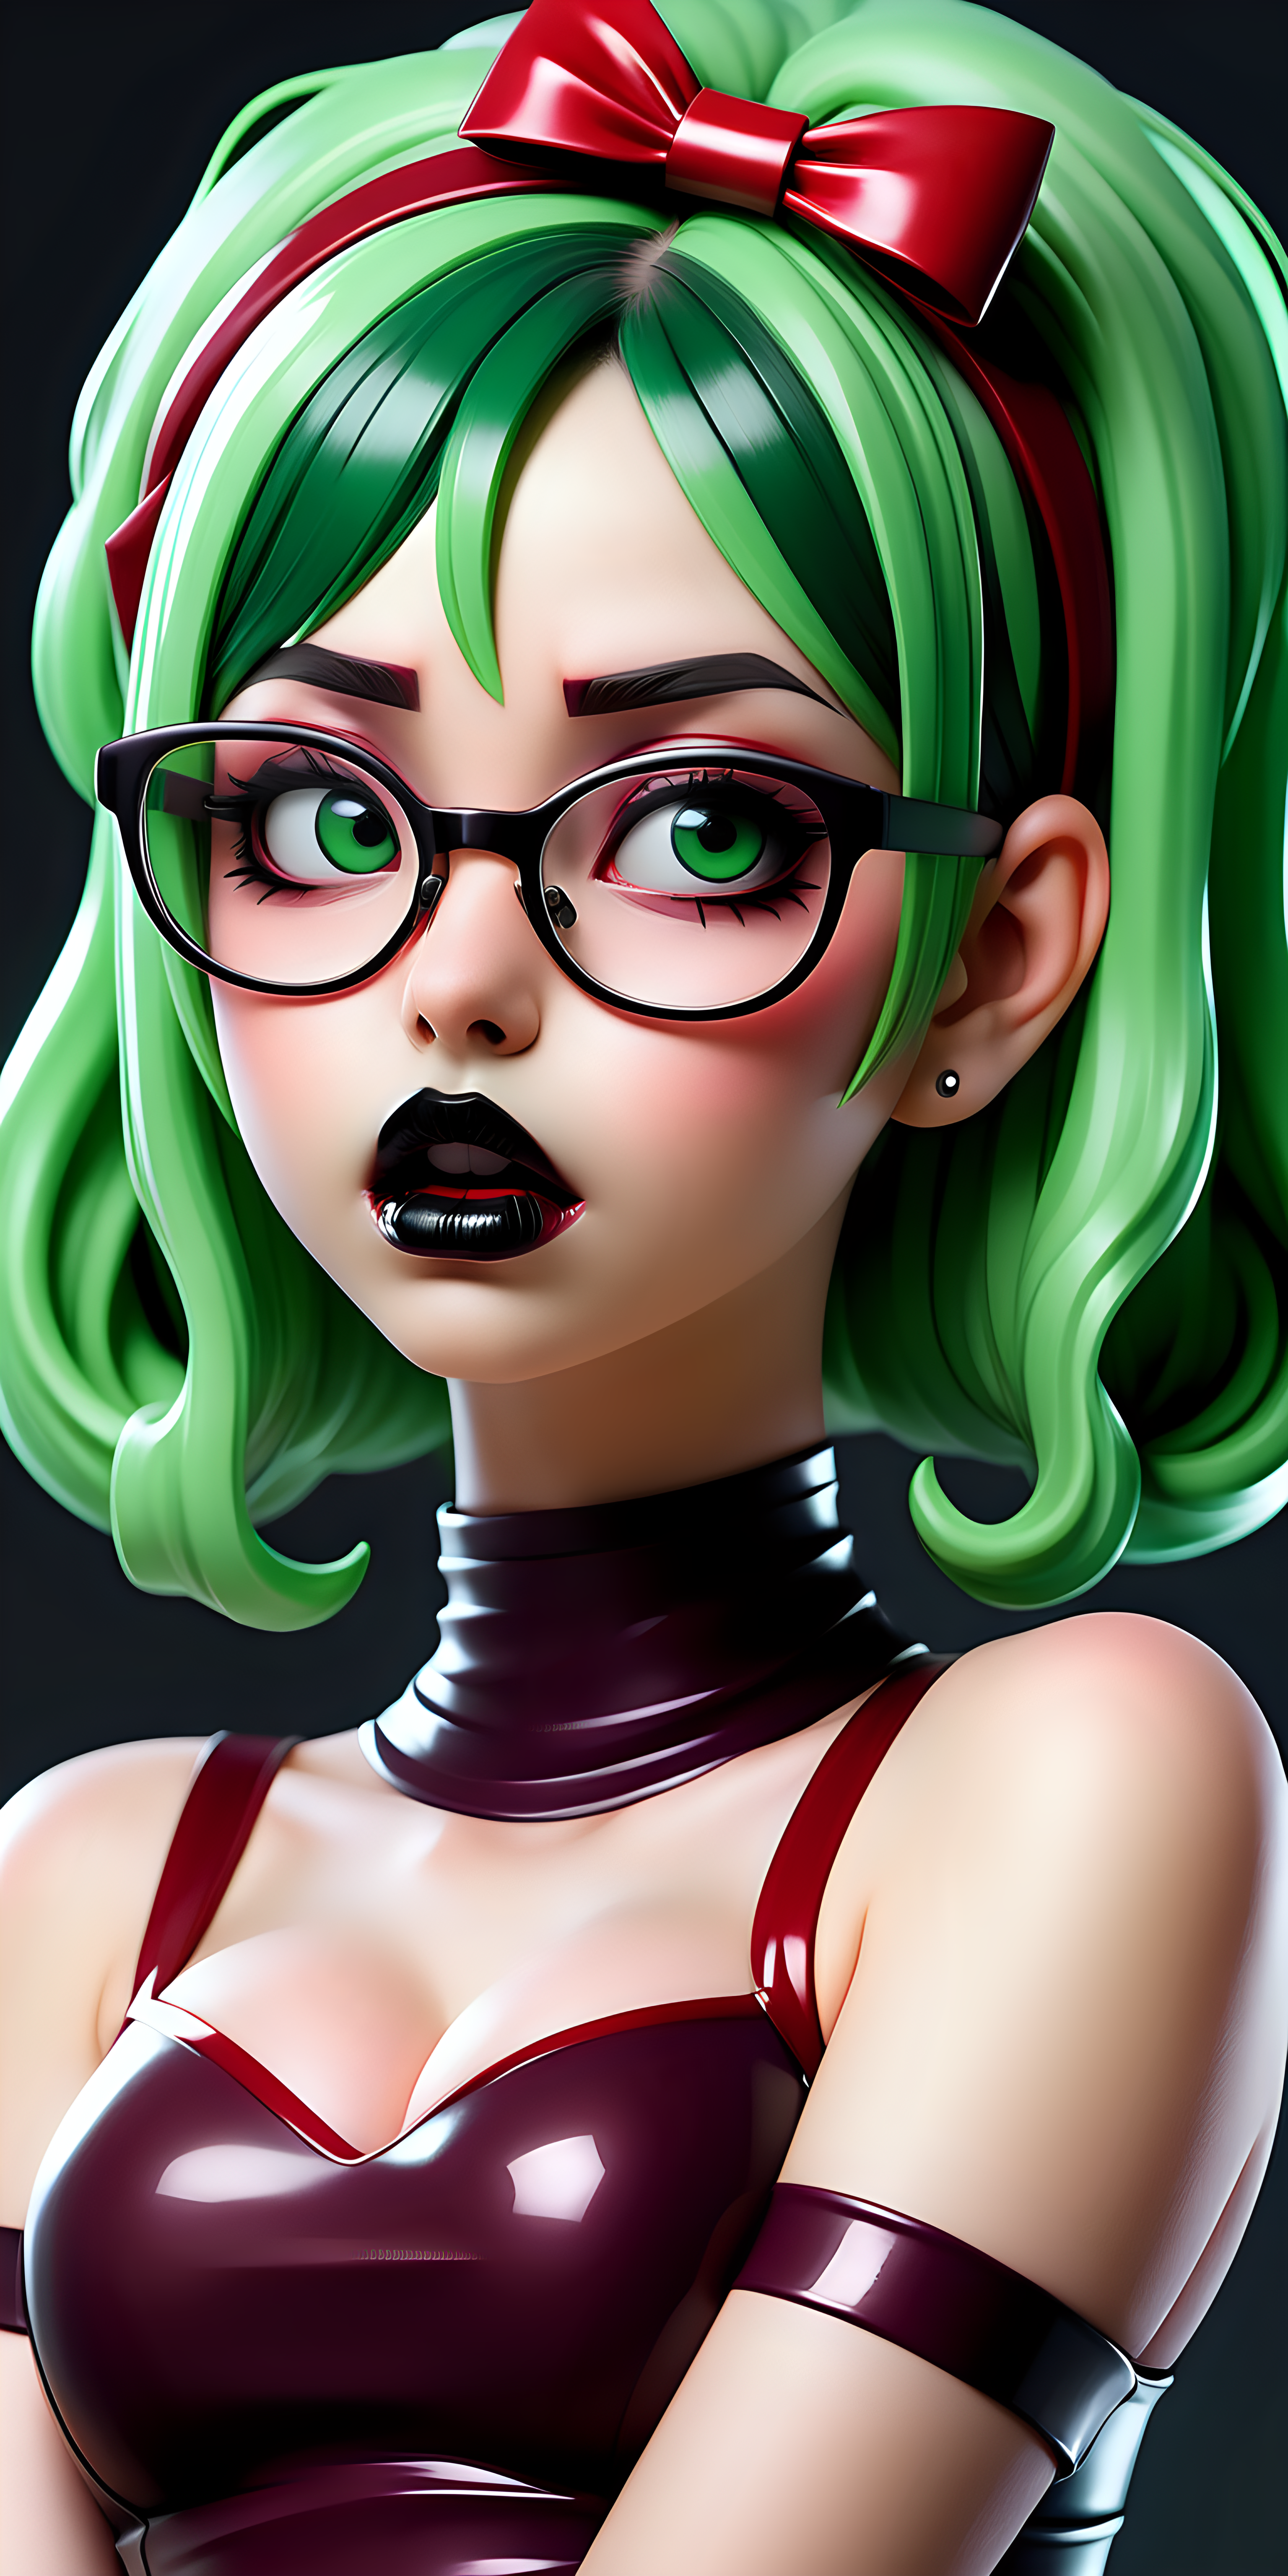 Anime Woman with green hair large lips with